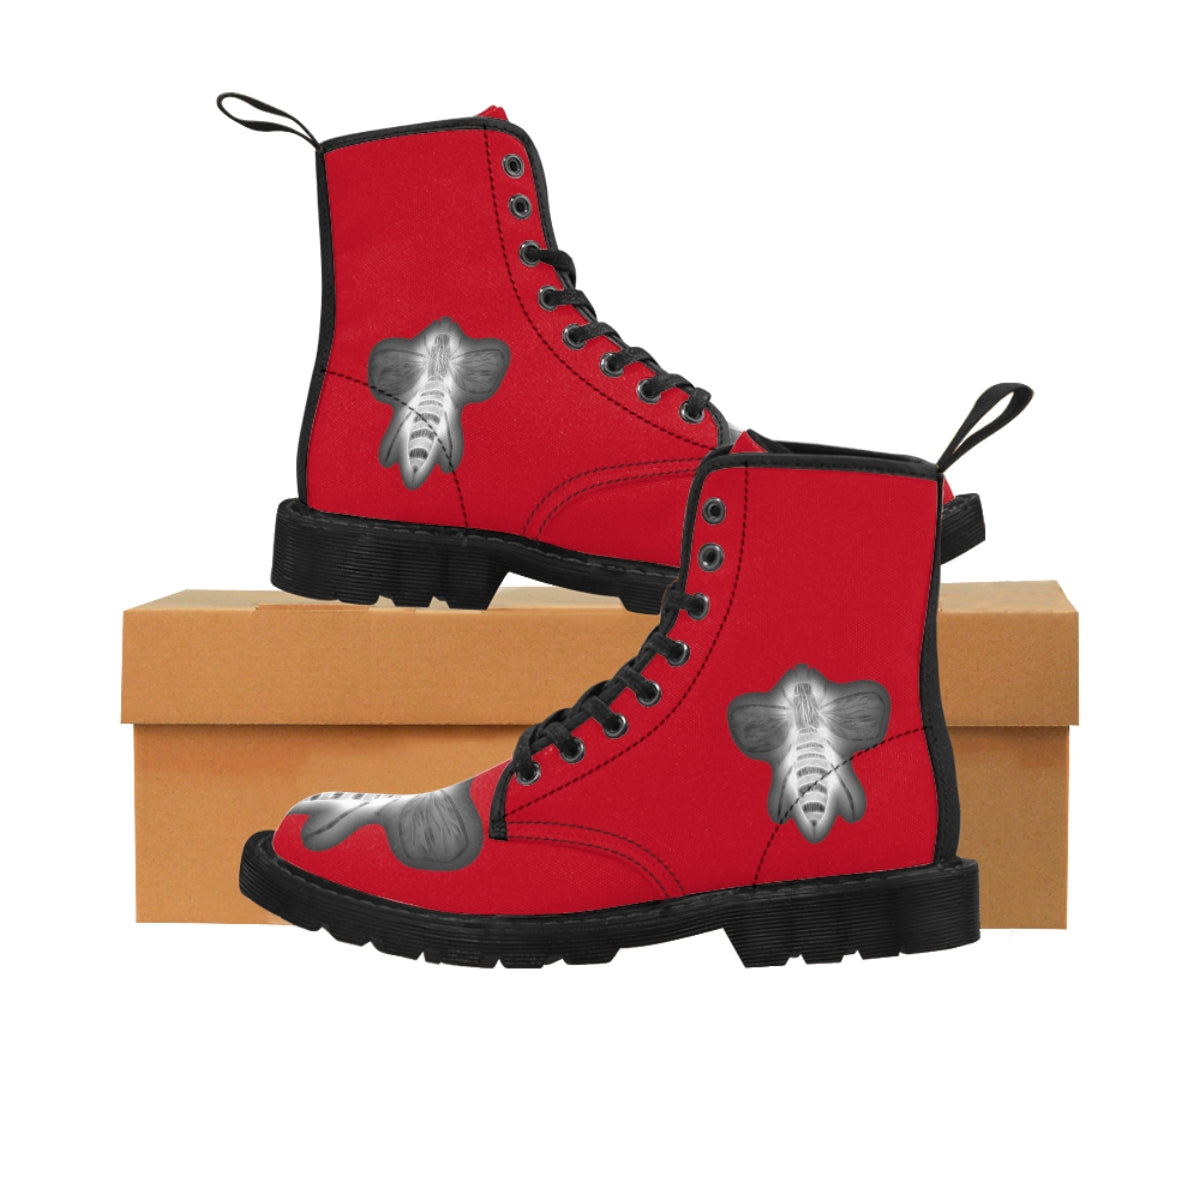 Negative Bee Men's Red Canvas Boots Black Shoes Bee boots combat boots fun mens boots Mens boots mens fashion boots Negative Bee red mens boots Shoes unique mens boots vegan boots vegan combat boots